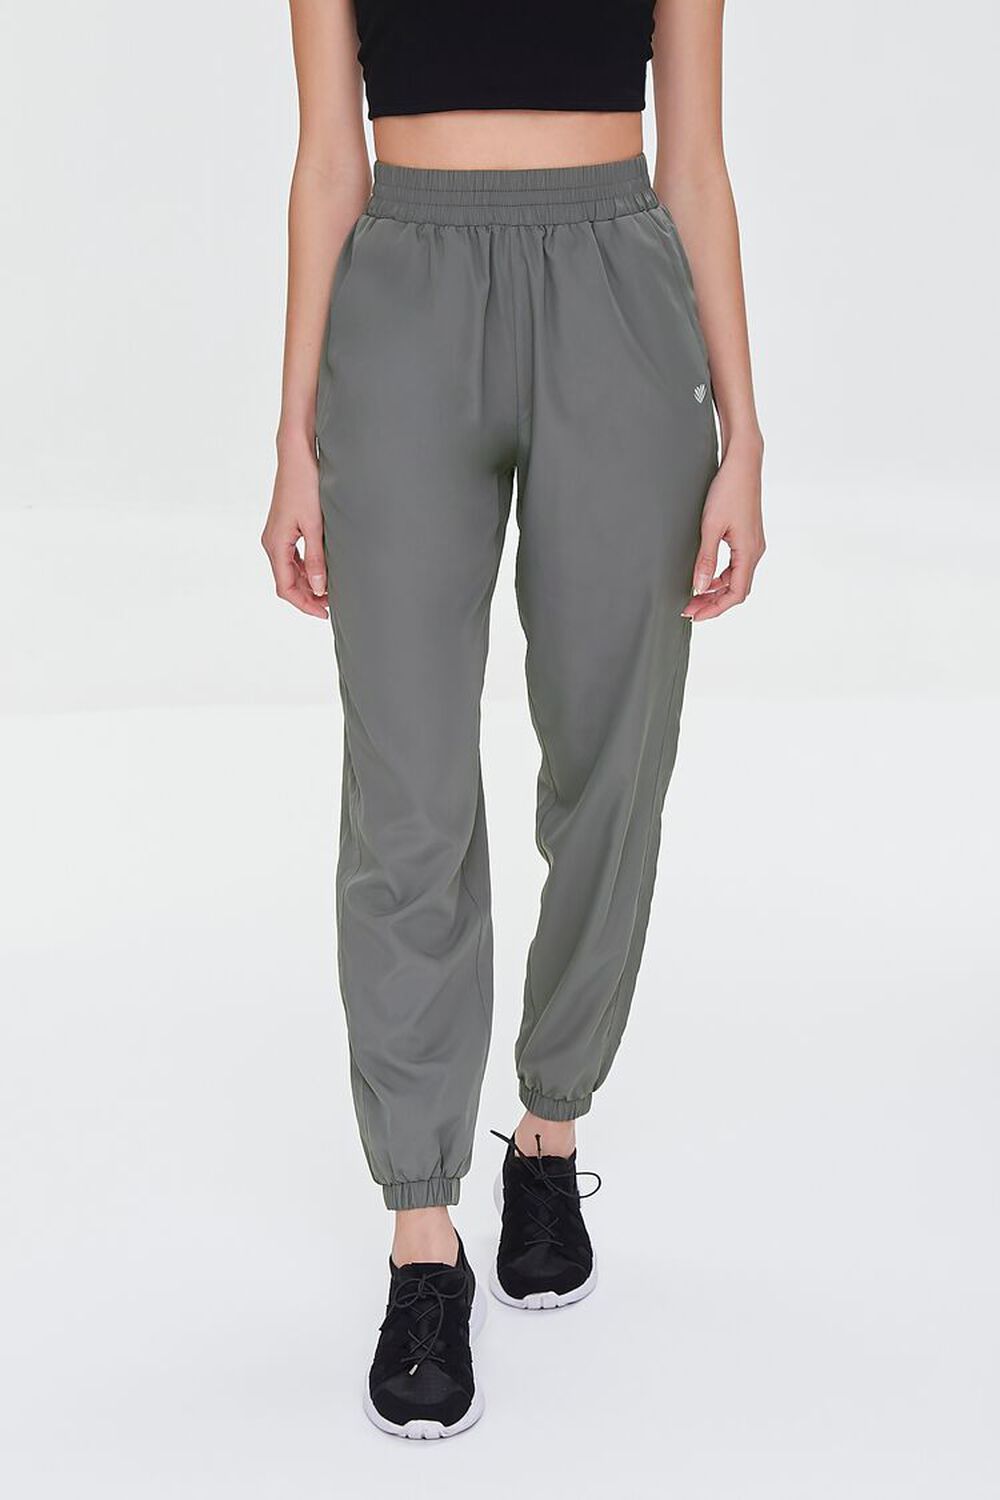 GREY Active High-Rise Joggers, image 2